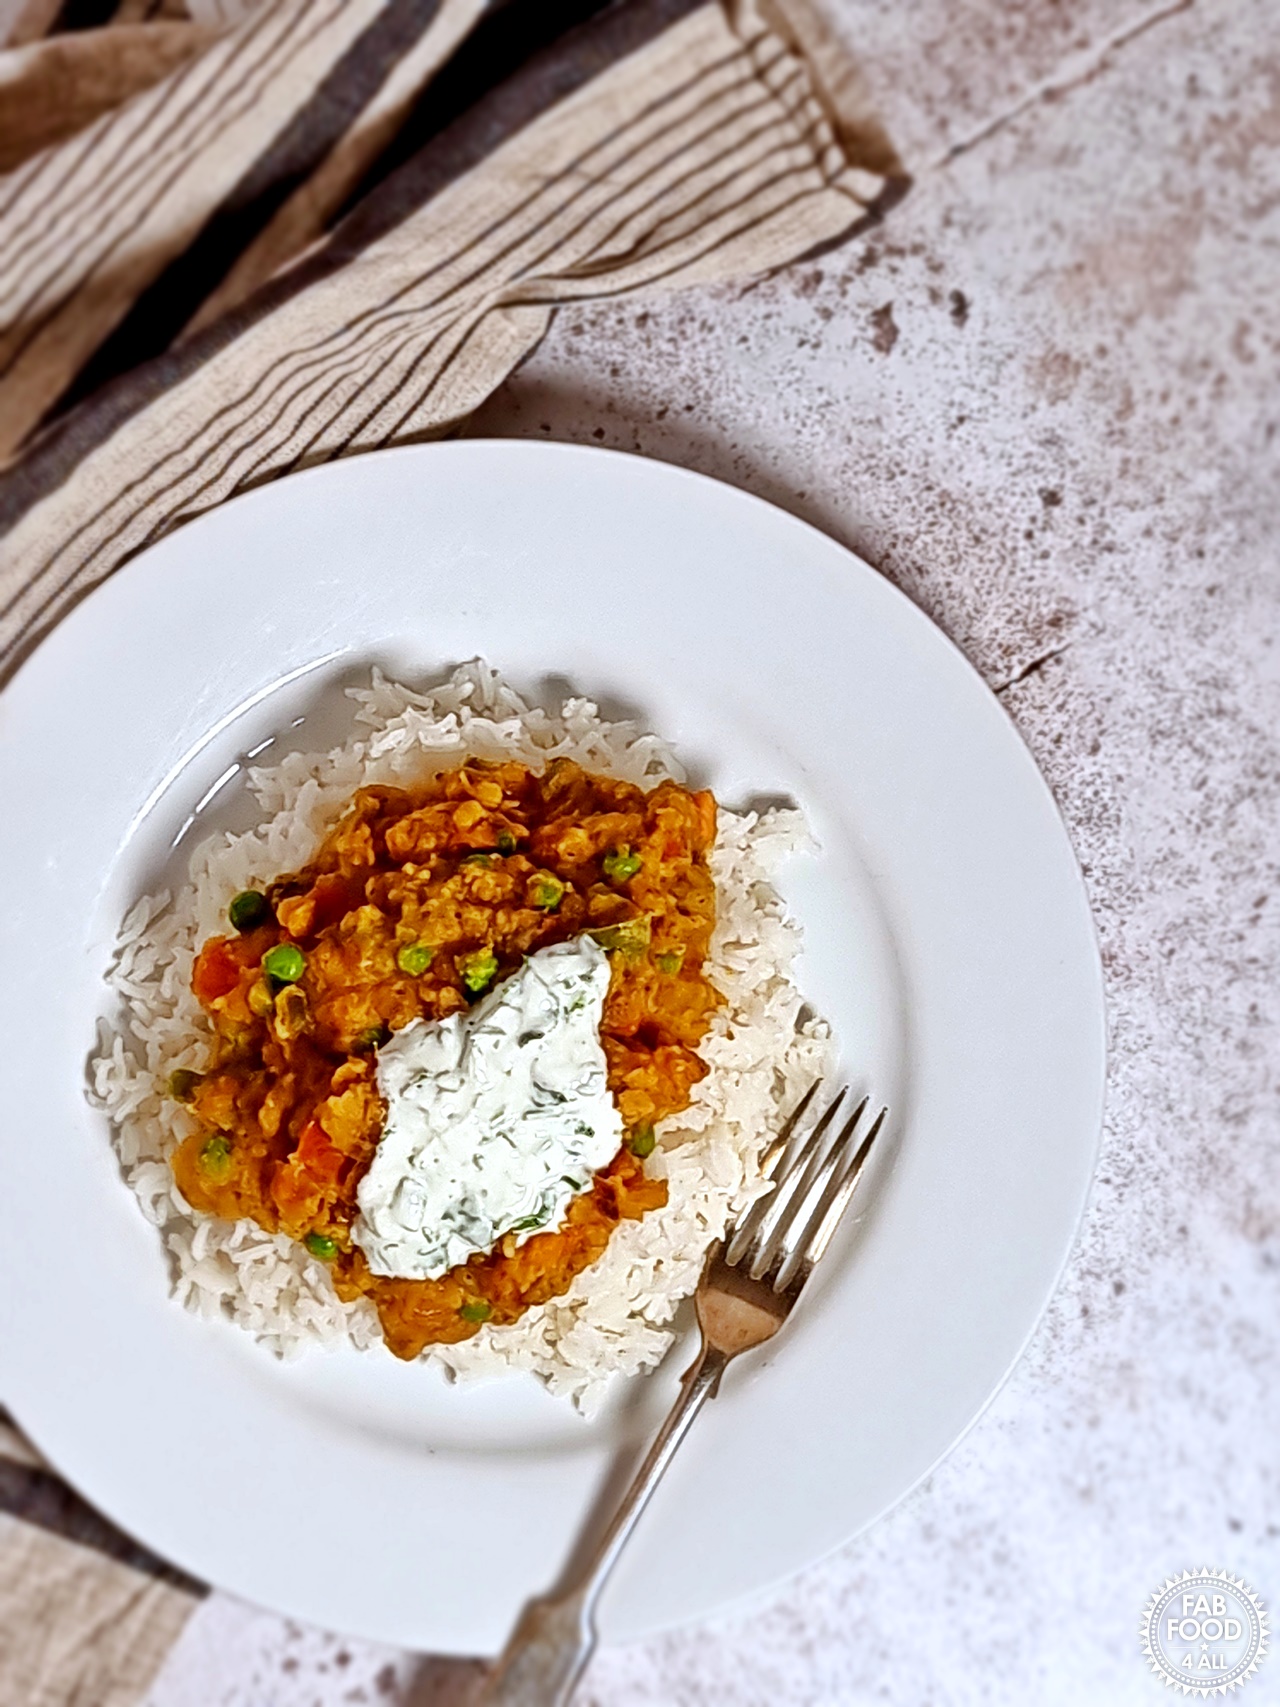 Overhead shot of Vegetable Dhal Curry with rice & garnished with coriander yogurt dressing.